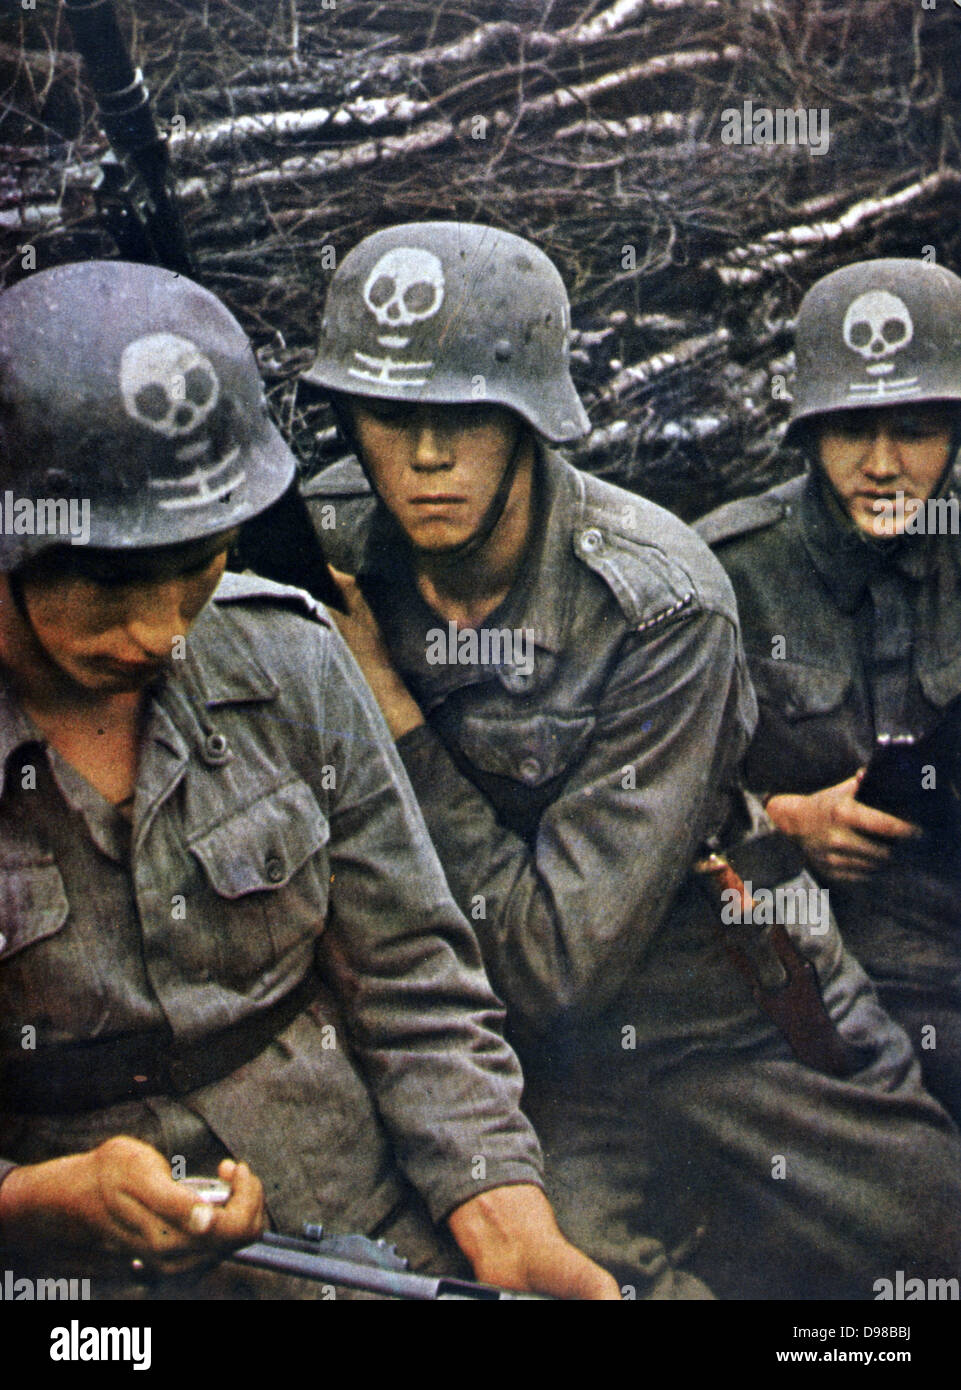 World War II 1939-1945: Group of soldiers from a Finnish regiment wearing tin helmets. From 'Signal', April 1943, German propaganda magazine produced by the Wehrmacht. Stock Photo